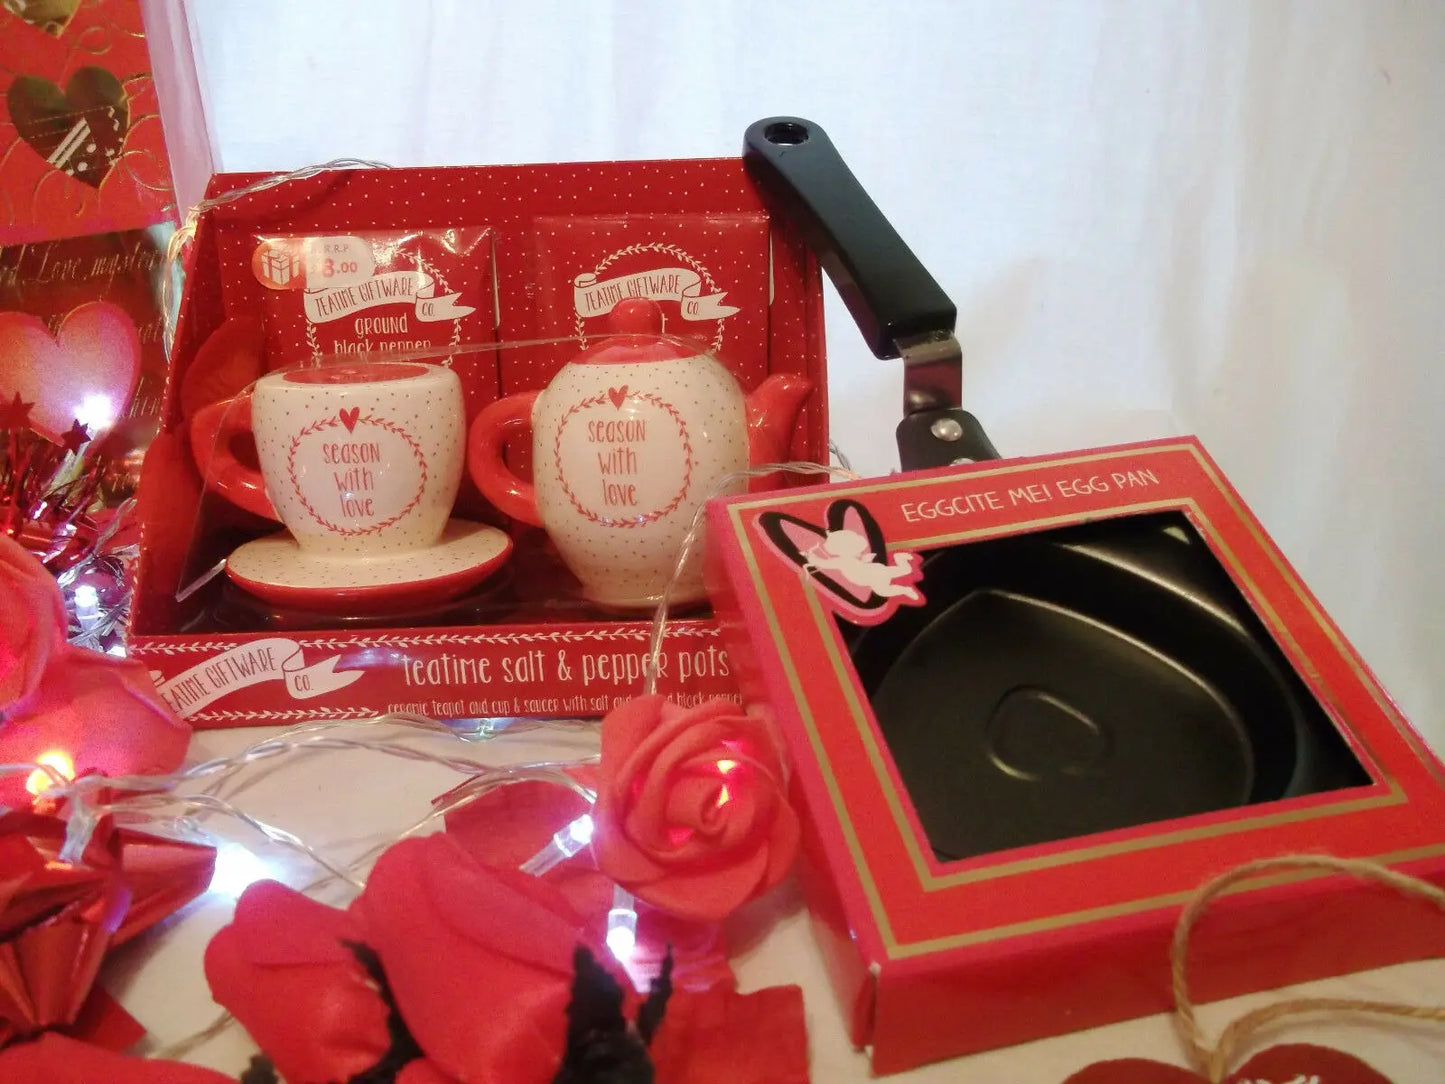 valentines day/mothers day "LOVE" GIFT SET2 - pamper the love of your life Wonkey Donkey Bazaar